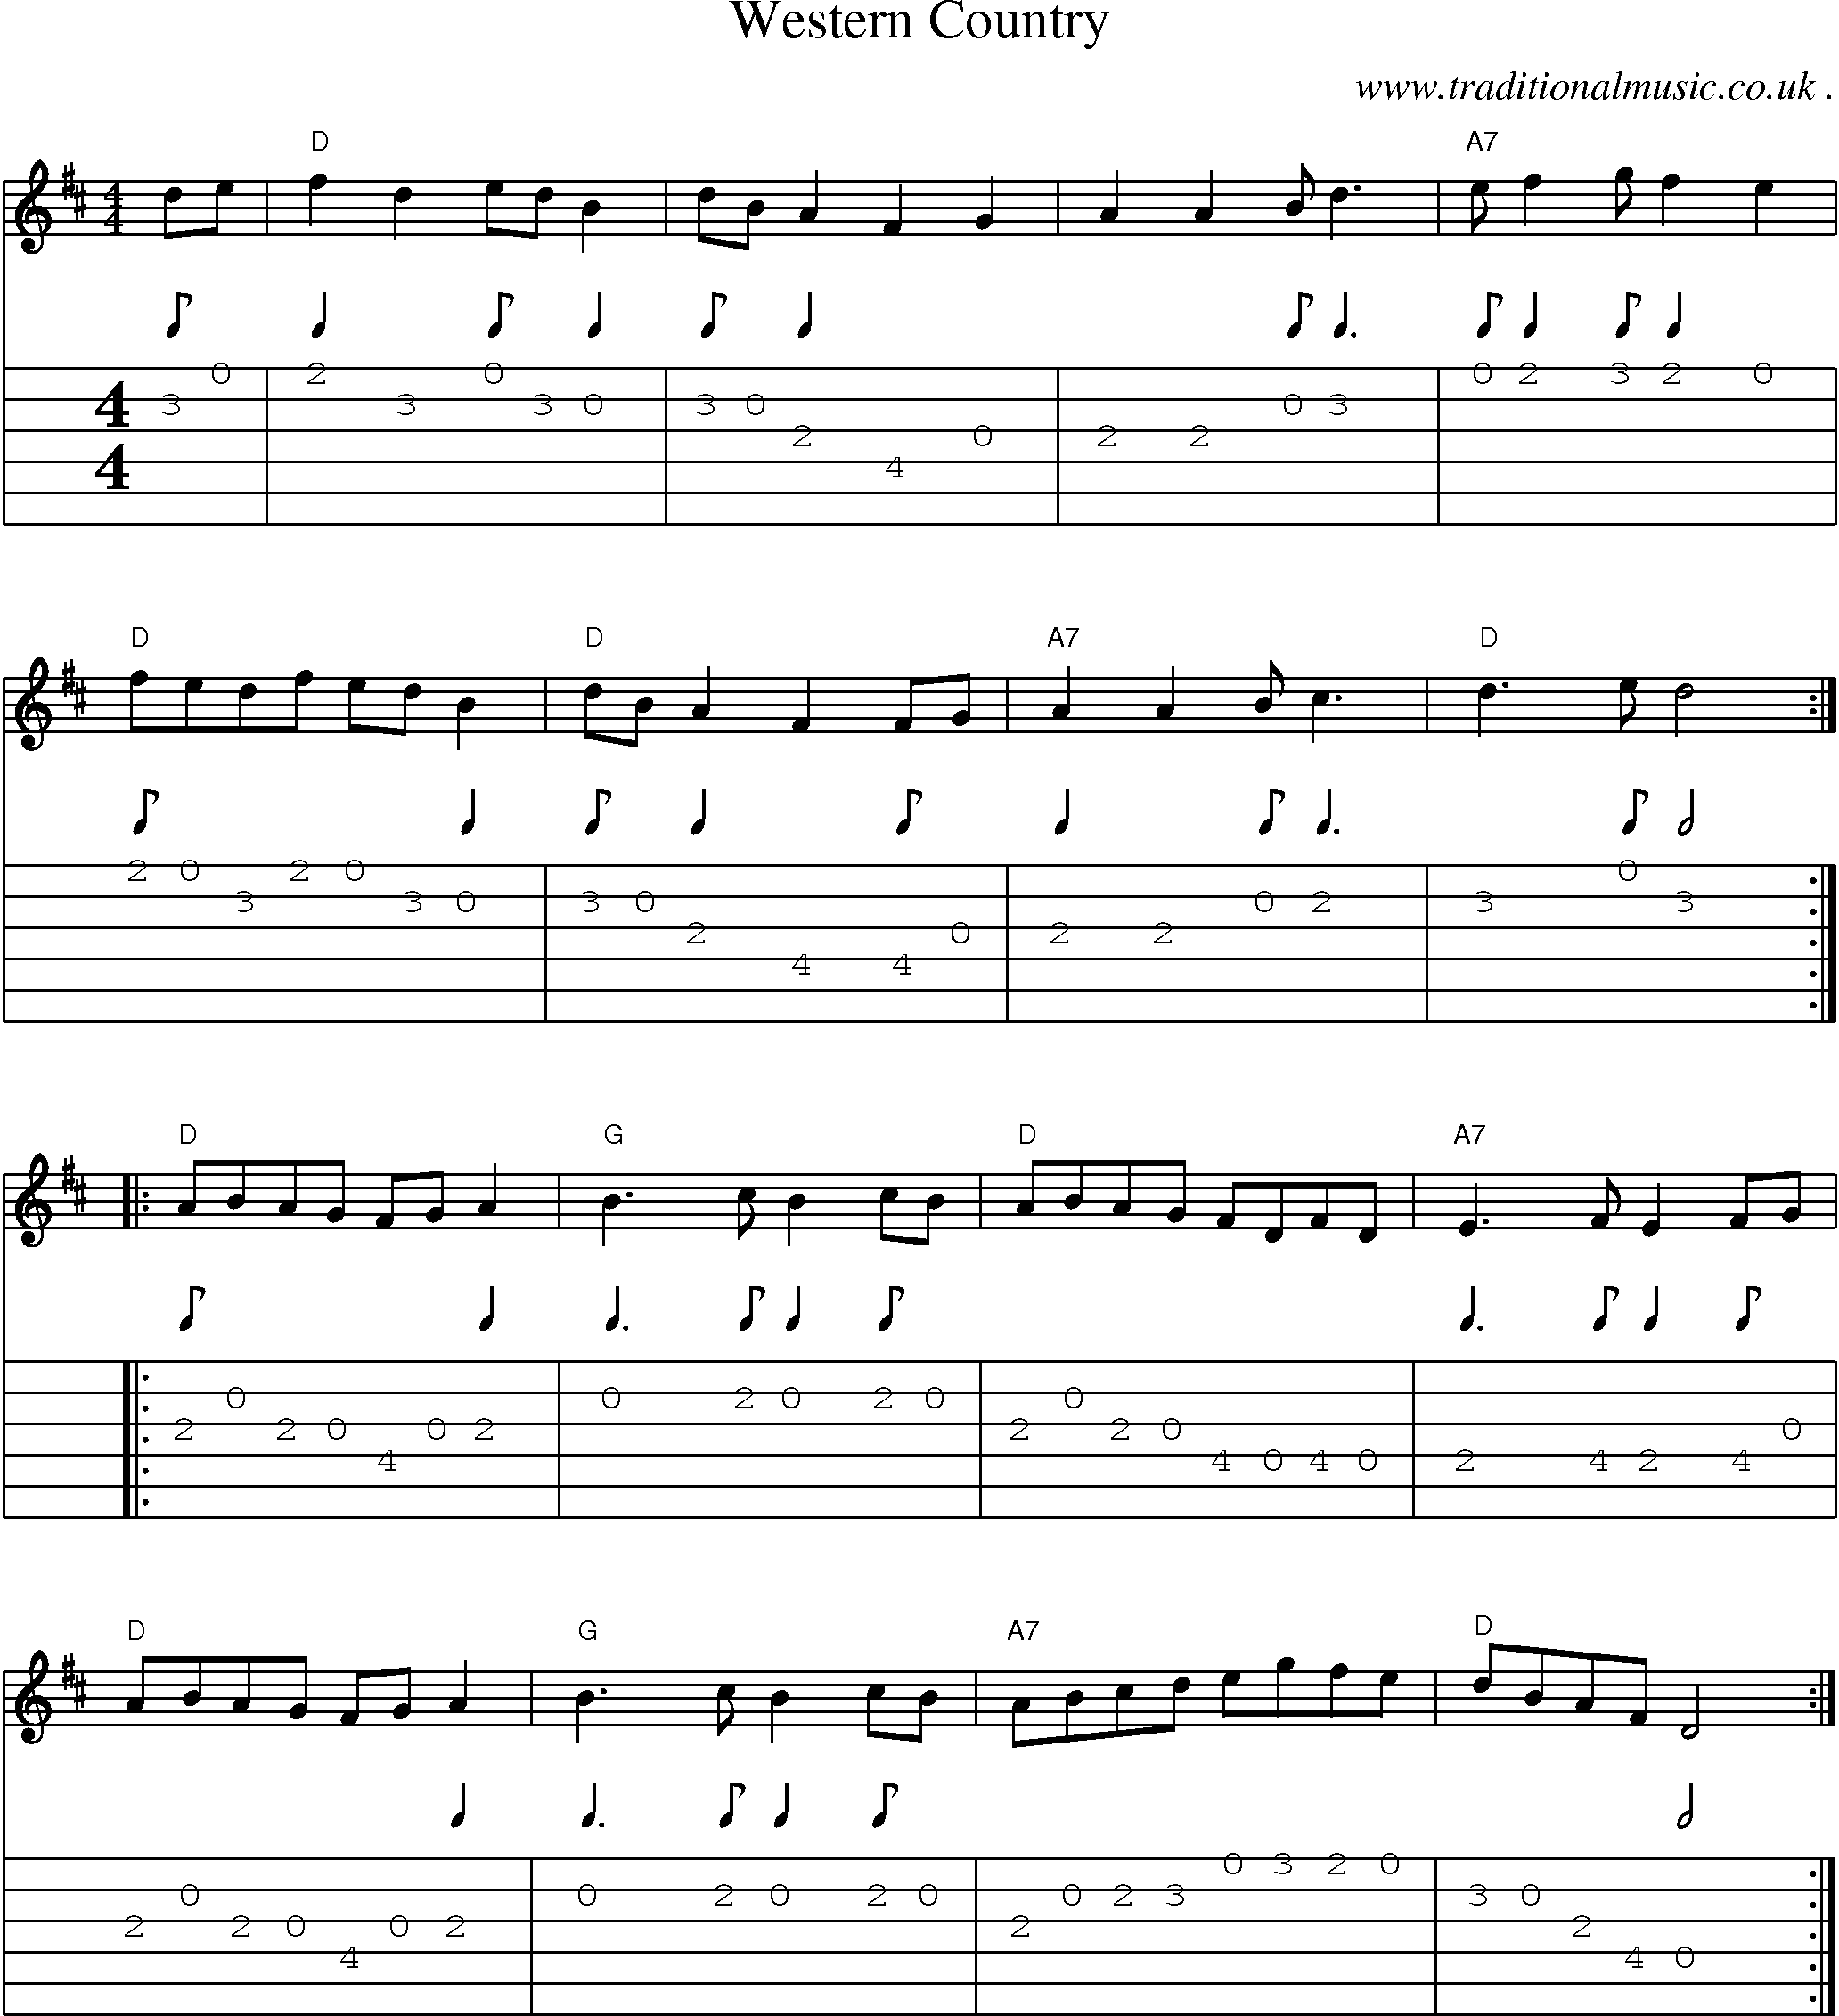 Music Score and Guitar Tabs for Western Country